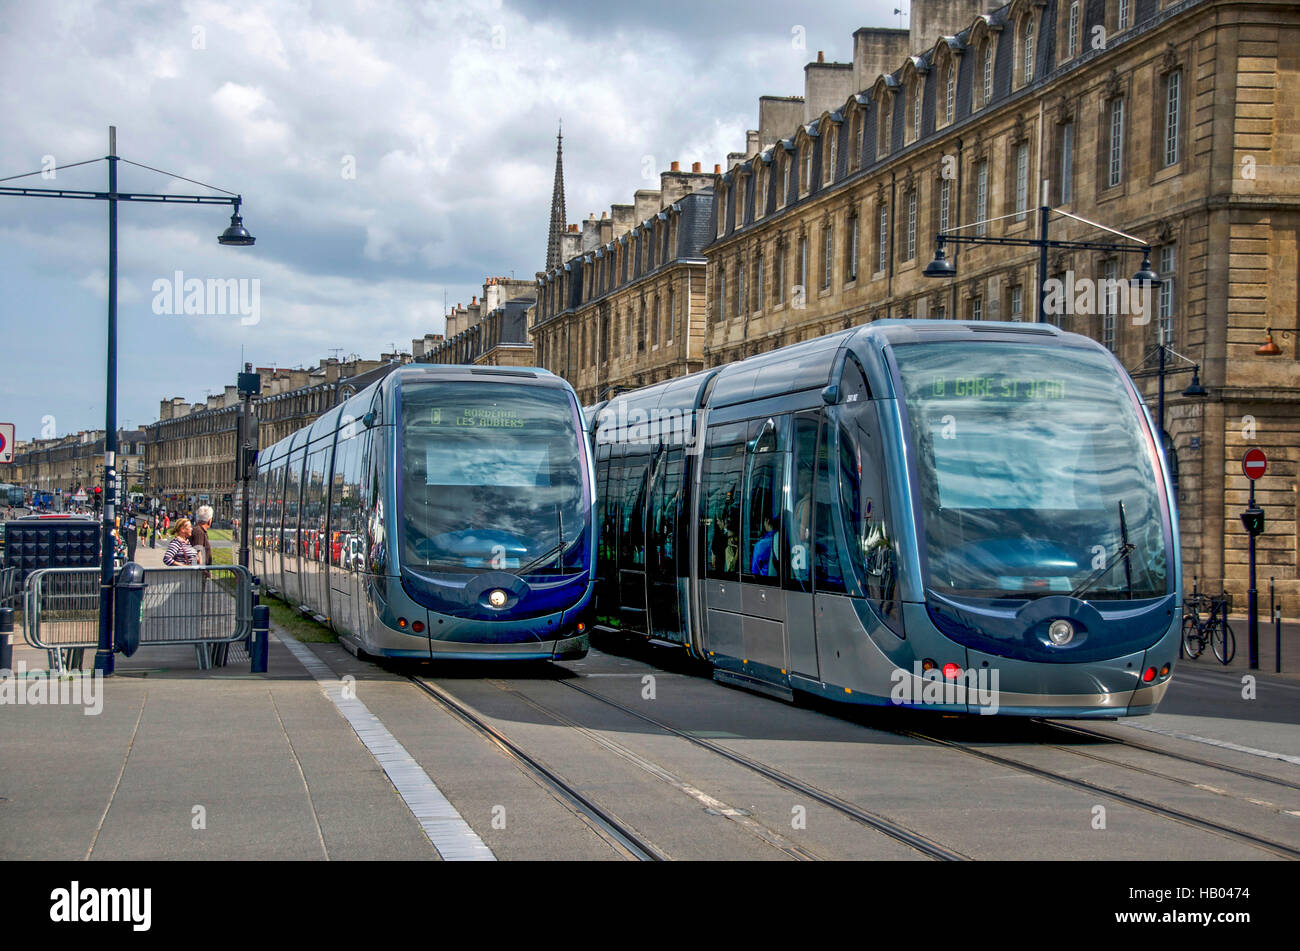 Public transport tram system in old Bordeaux, France, Europe Stock Photo